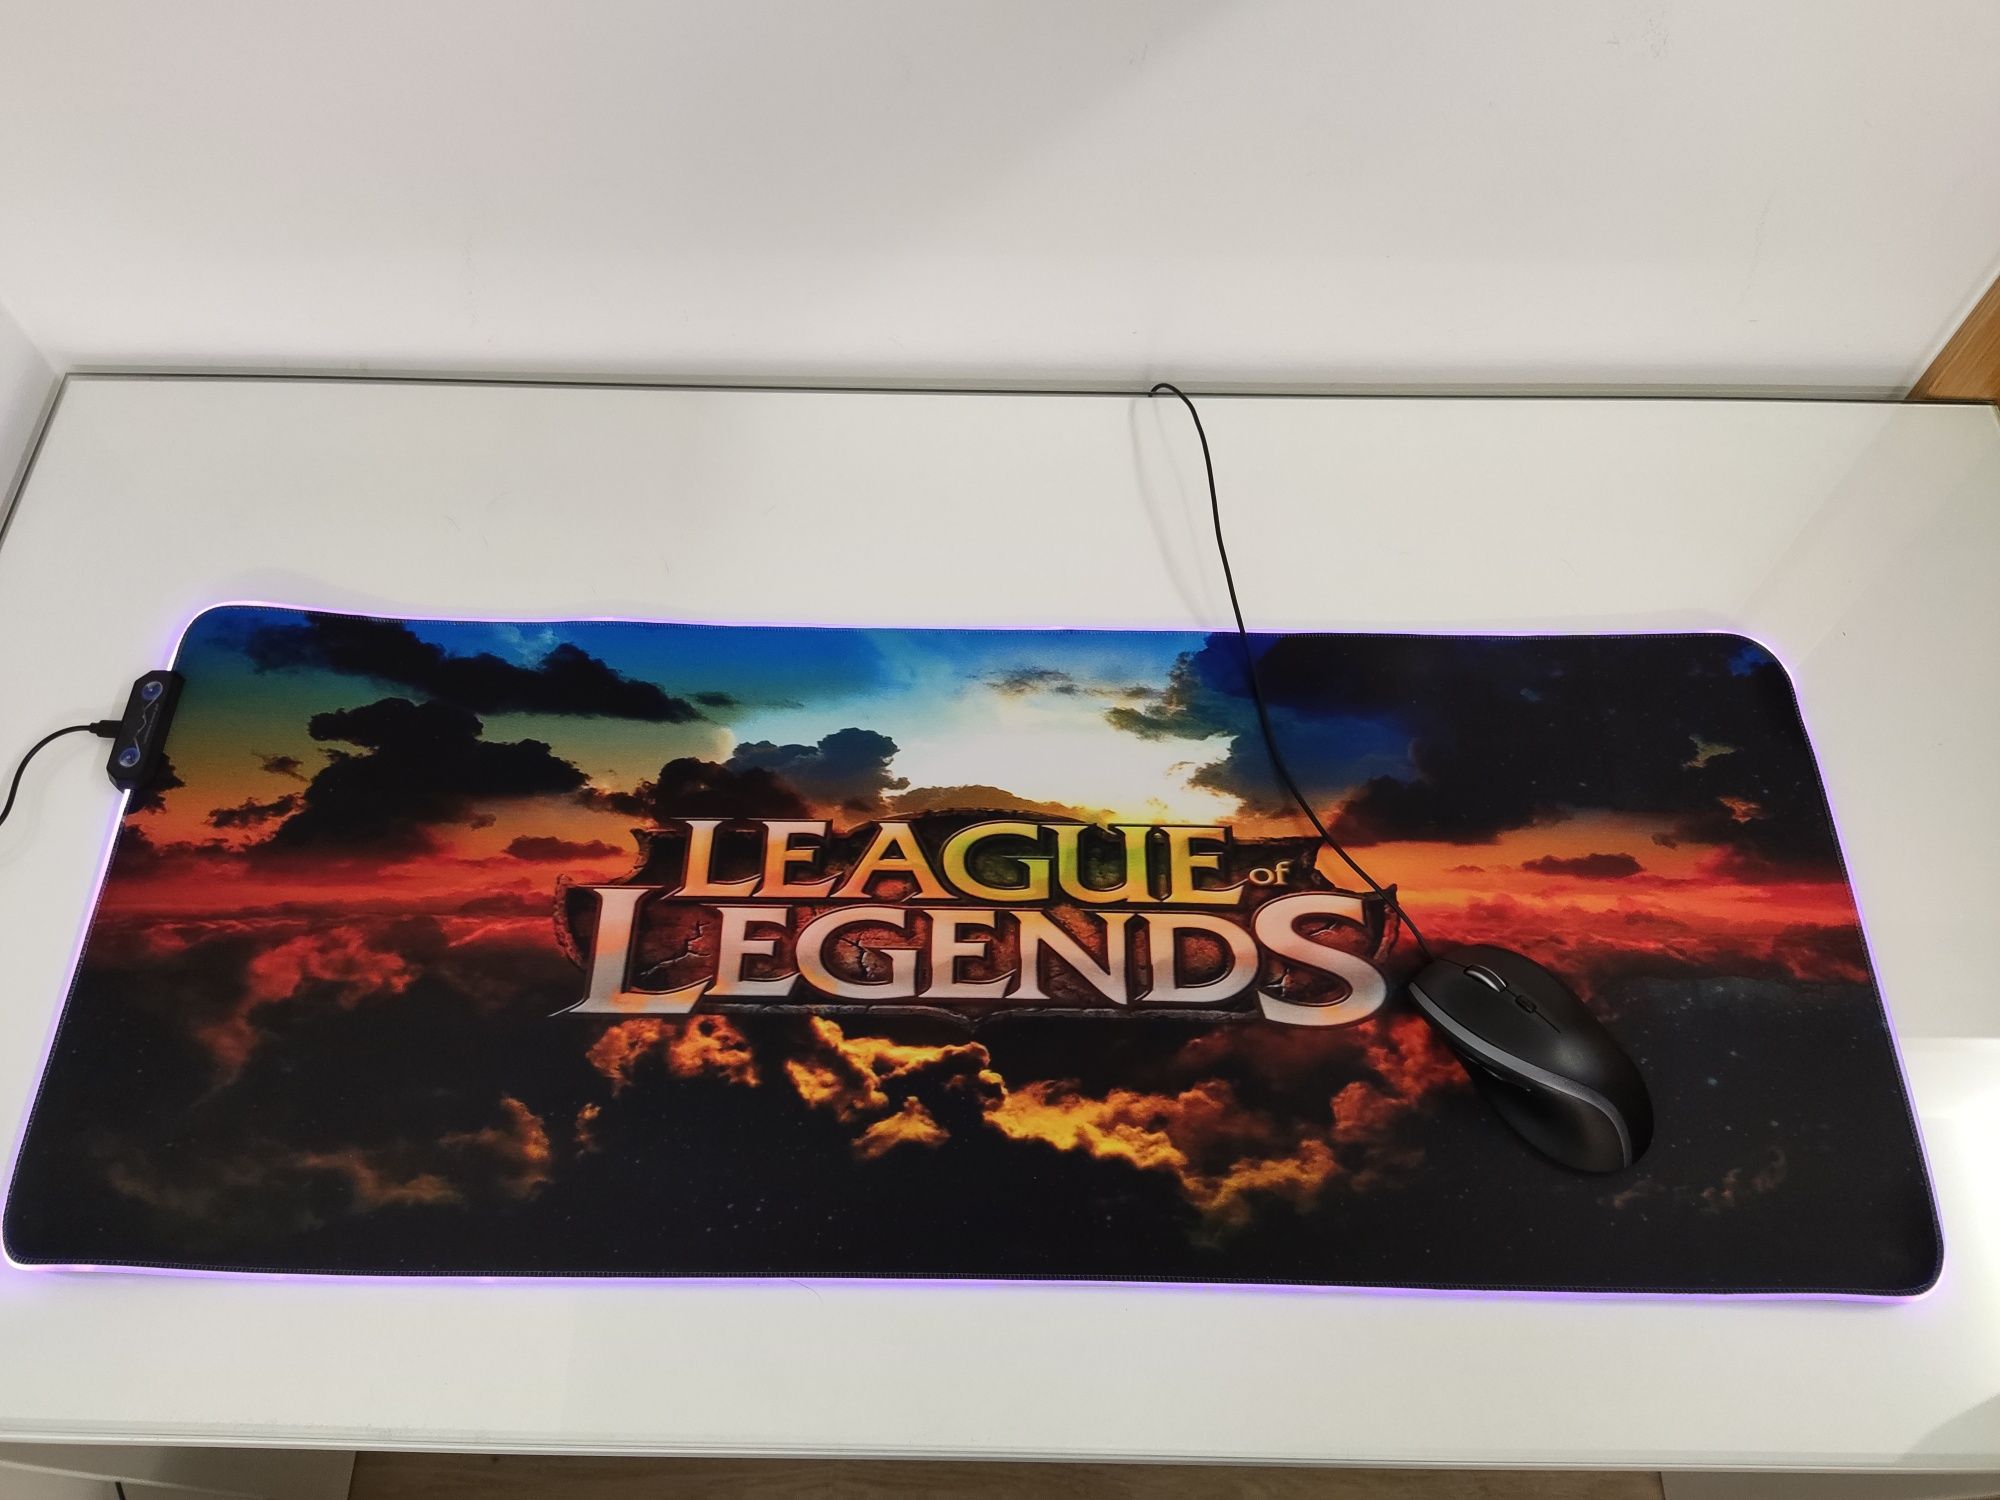 Tapete gaming "League of Legends" XXL com LED's